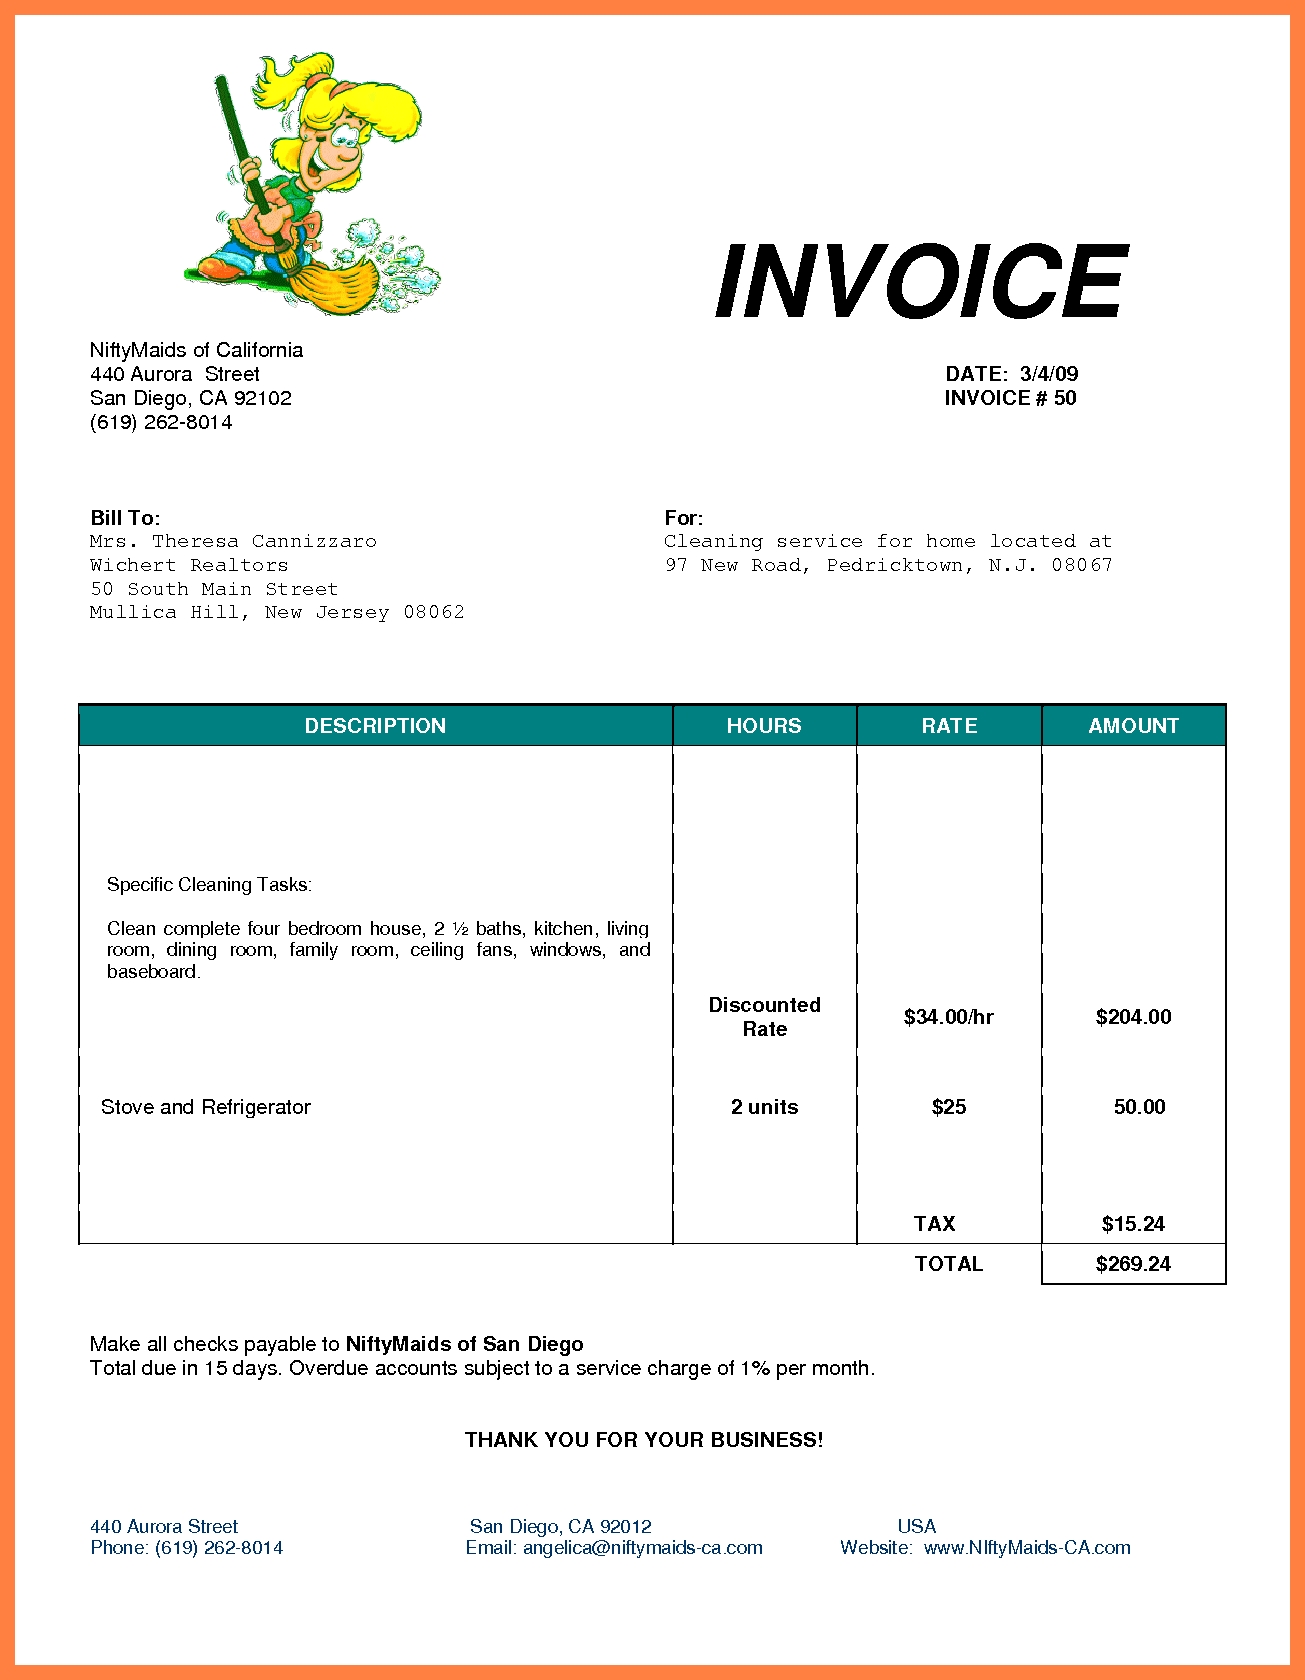 download invoice template for openoffice